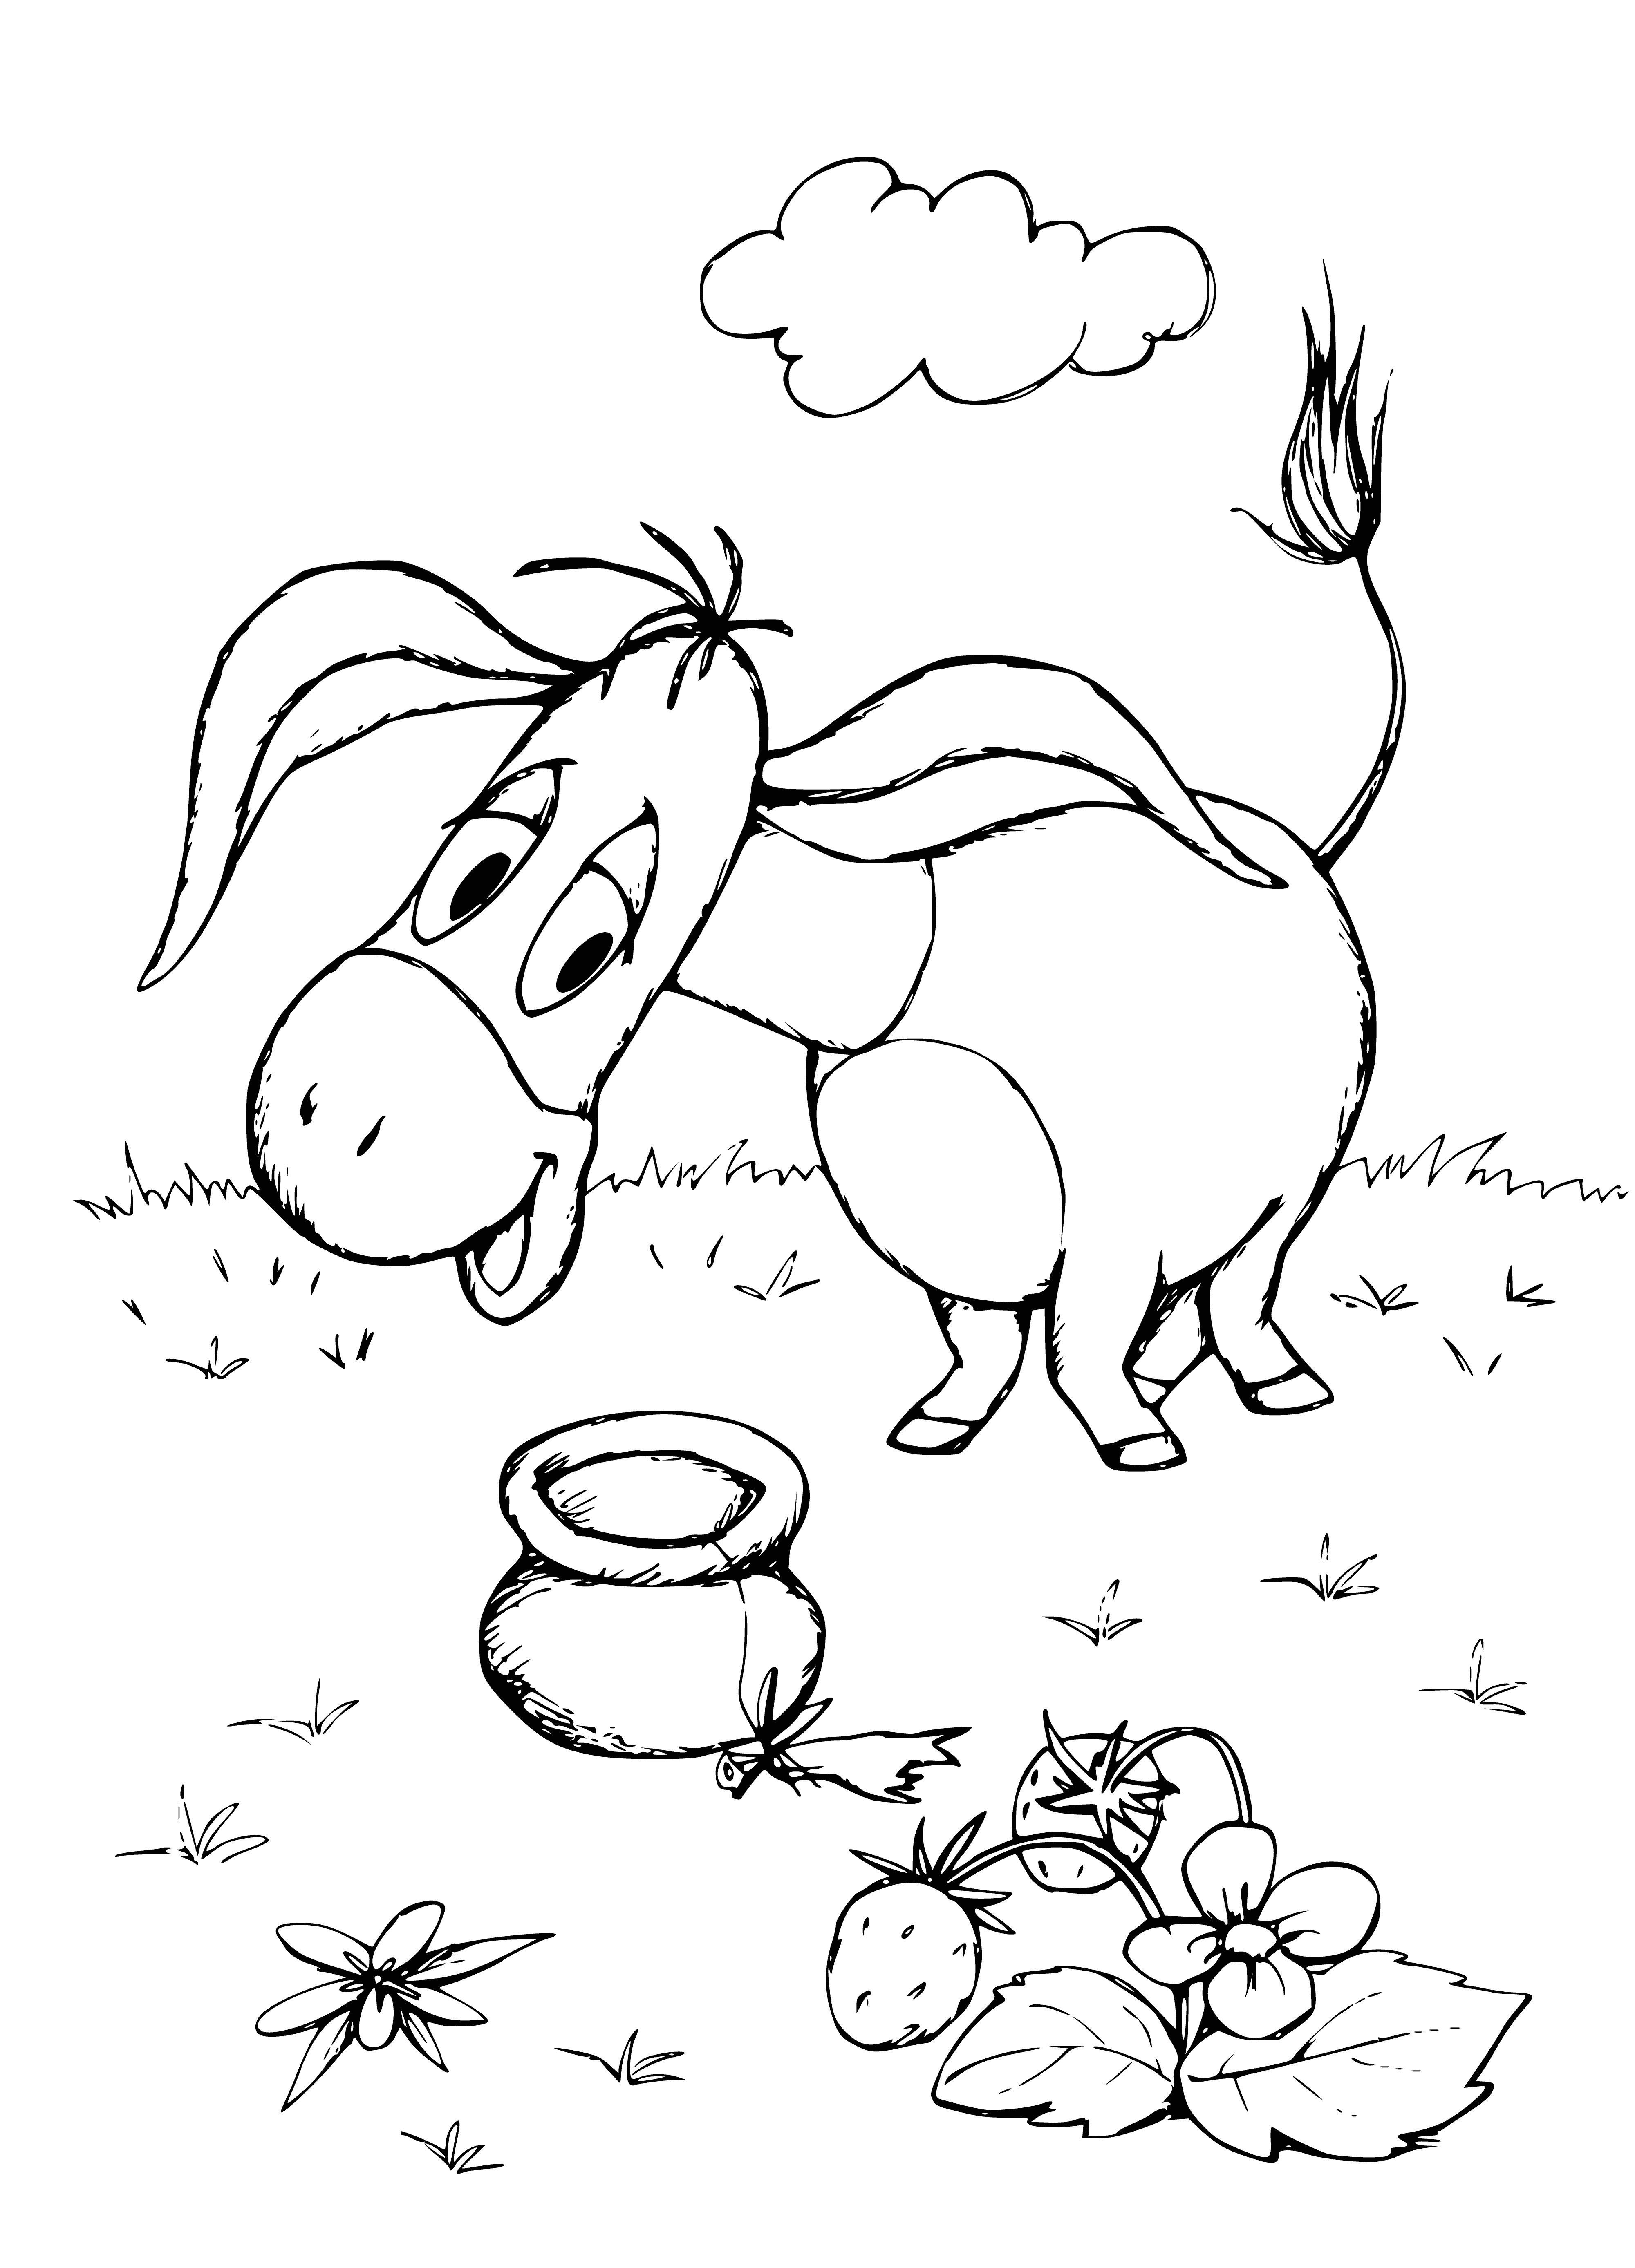 coloring page: Donkey with big ears smiles in a field of tall grass in this adorable coloring page.